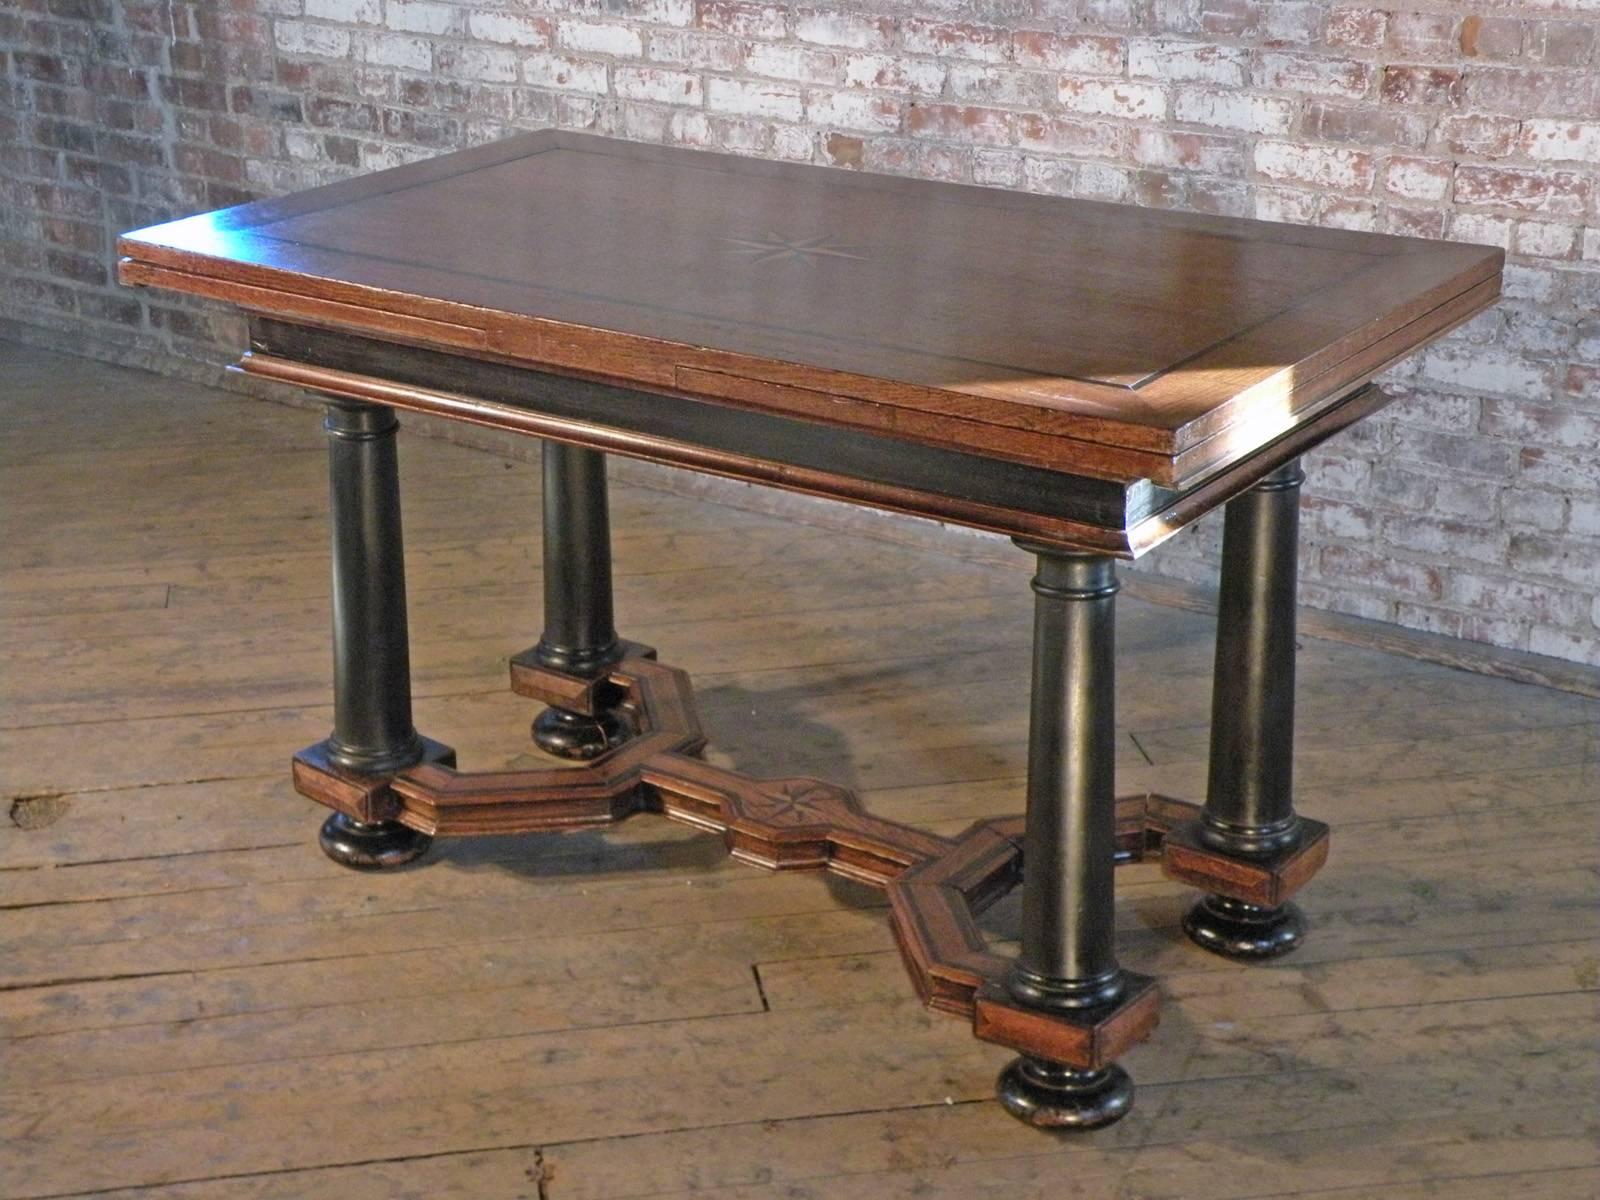 Dutch extension table of typical form. The top and each of the extension leaves feature an inlaid star in the center and linear inlay around the edge, conforming with the inlay on the double-Y stretcher.
The contrast of the blond oak with the ebony